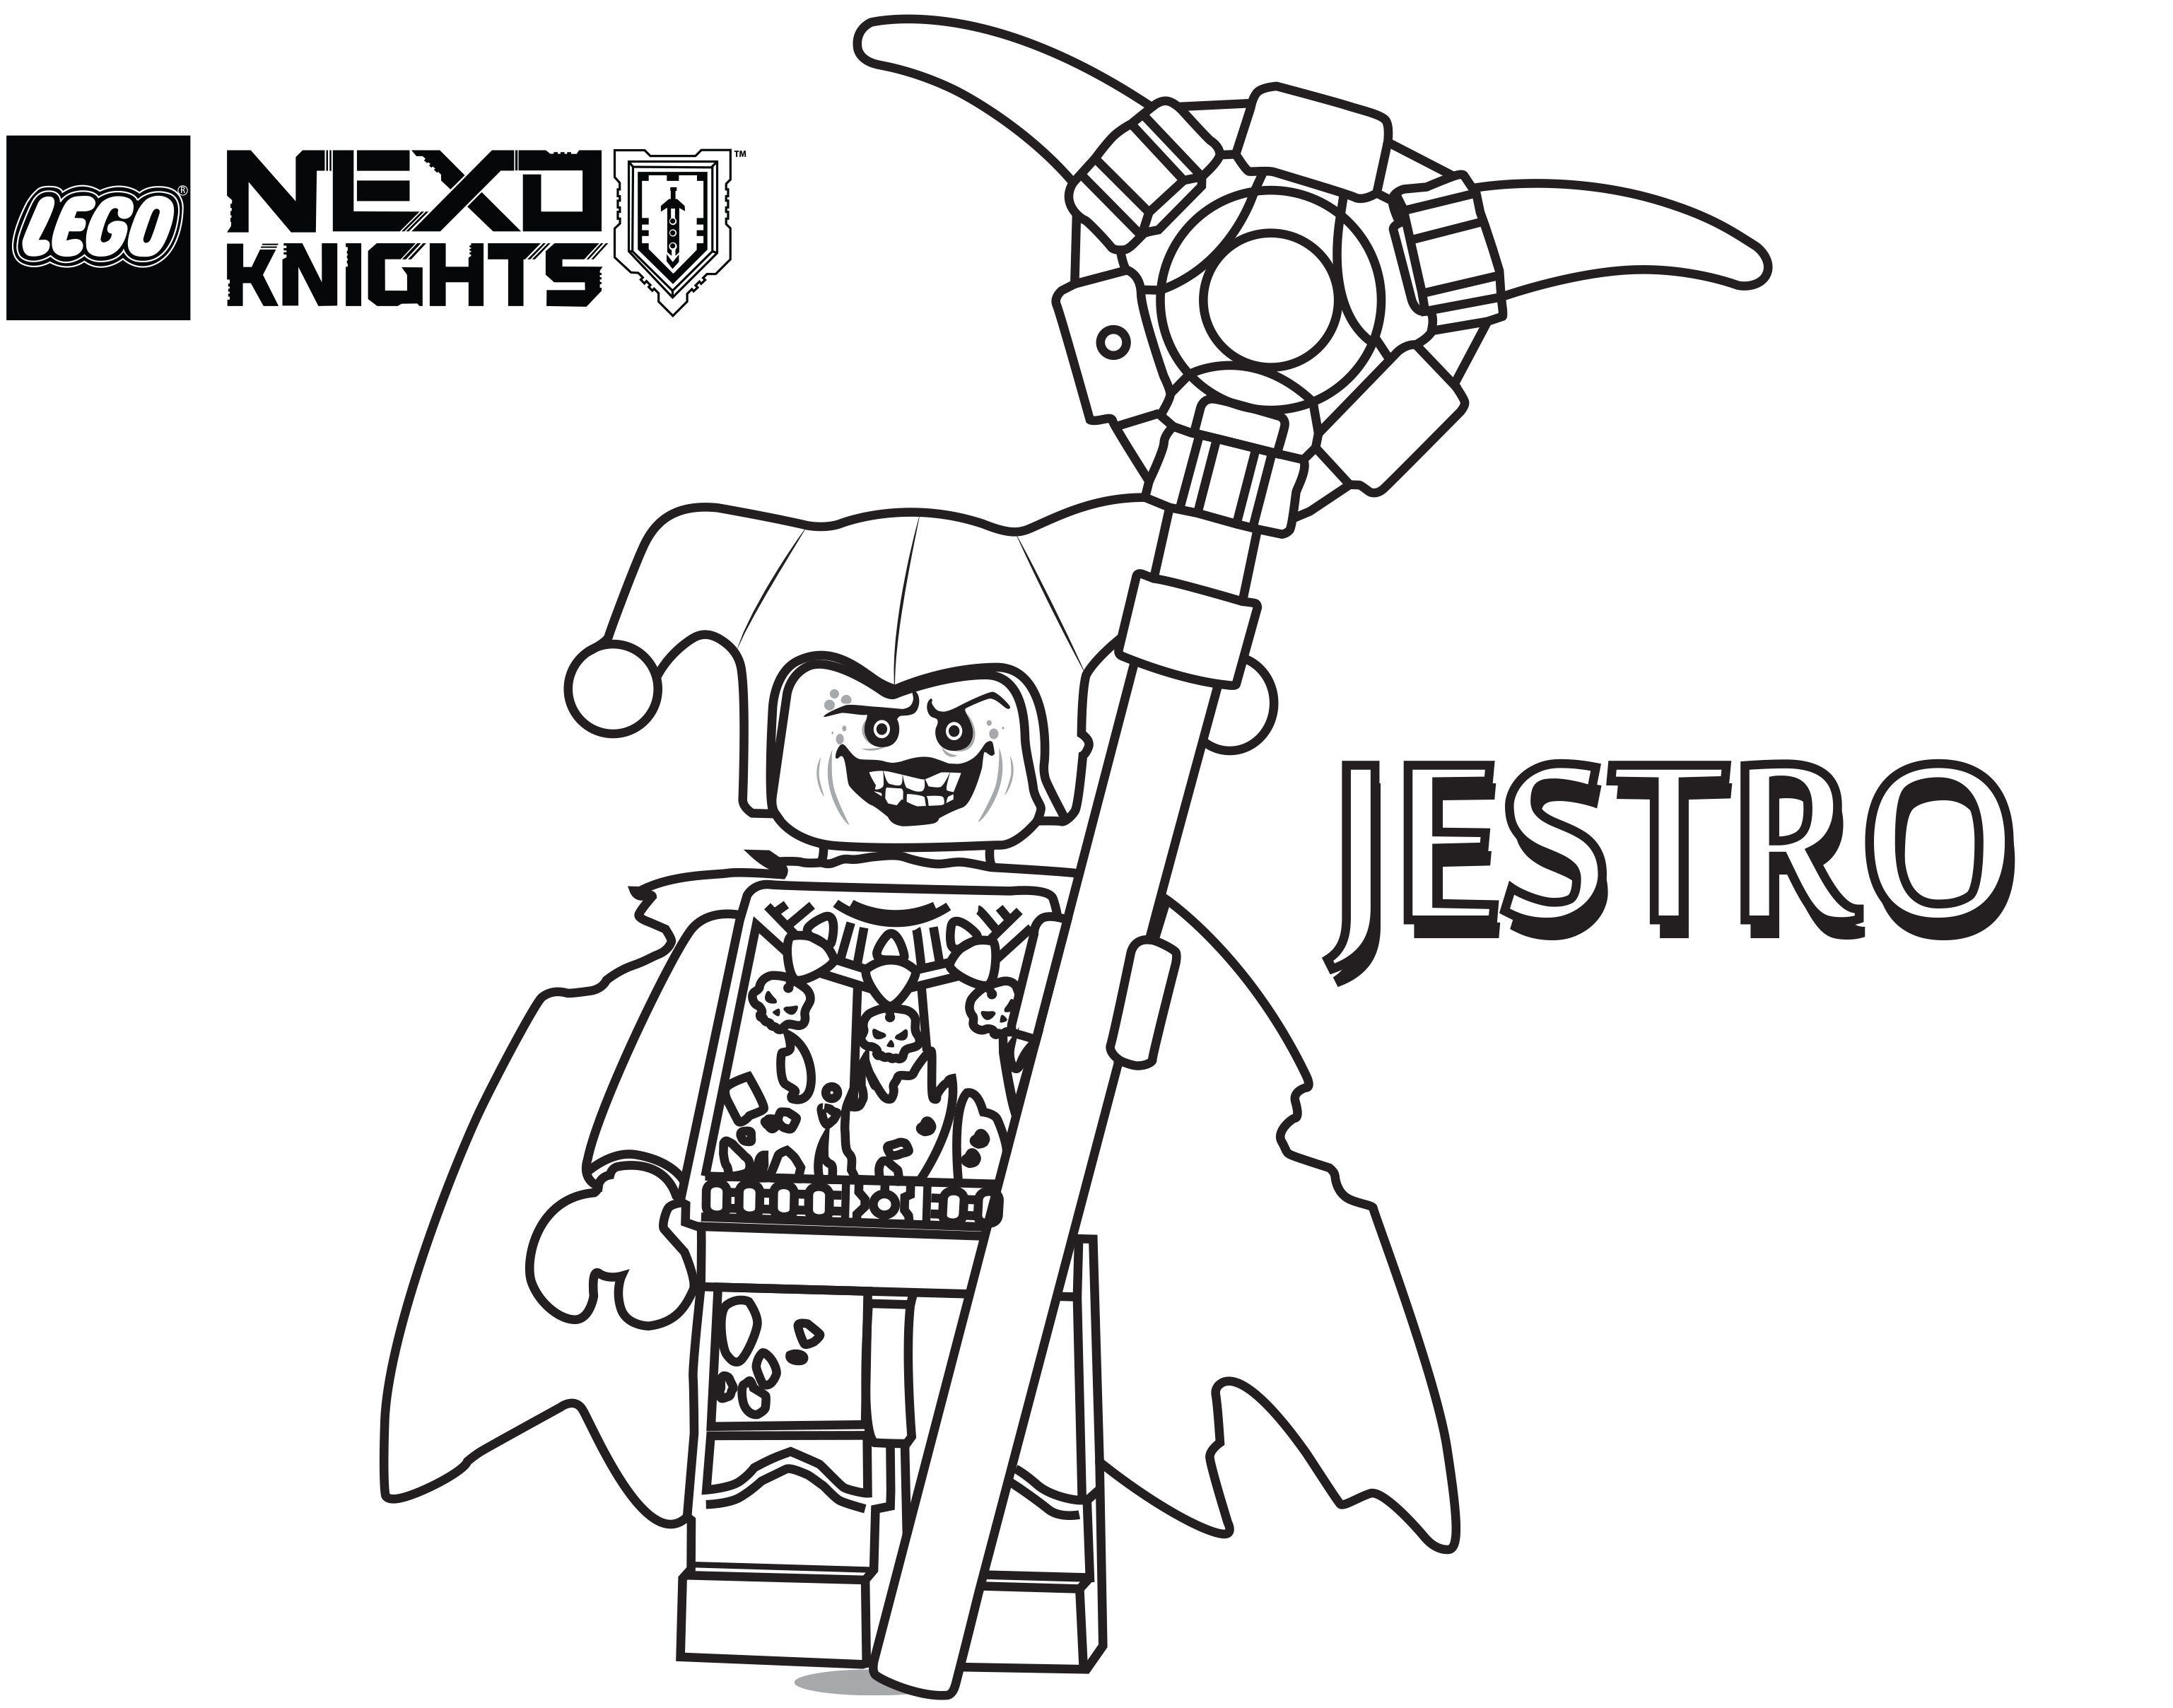 LEGO Nexo Knights Coloring Pages - The Brick Fan | The Brick Fan